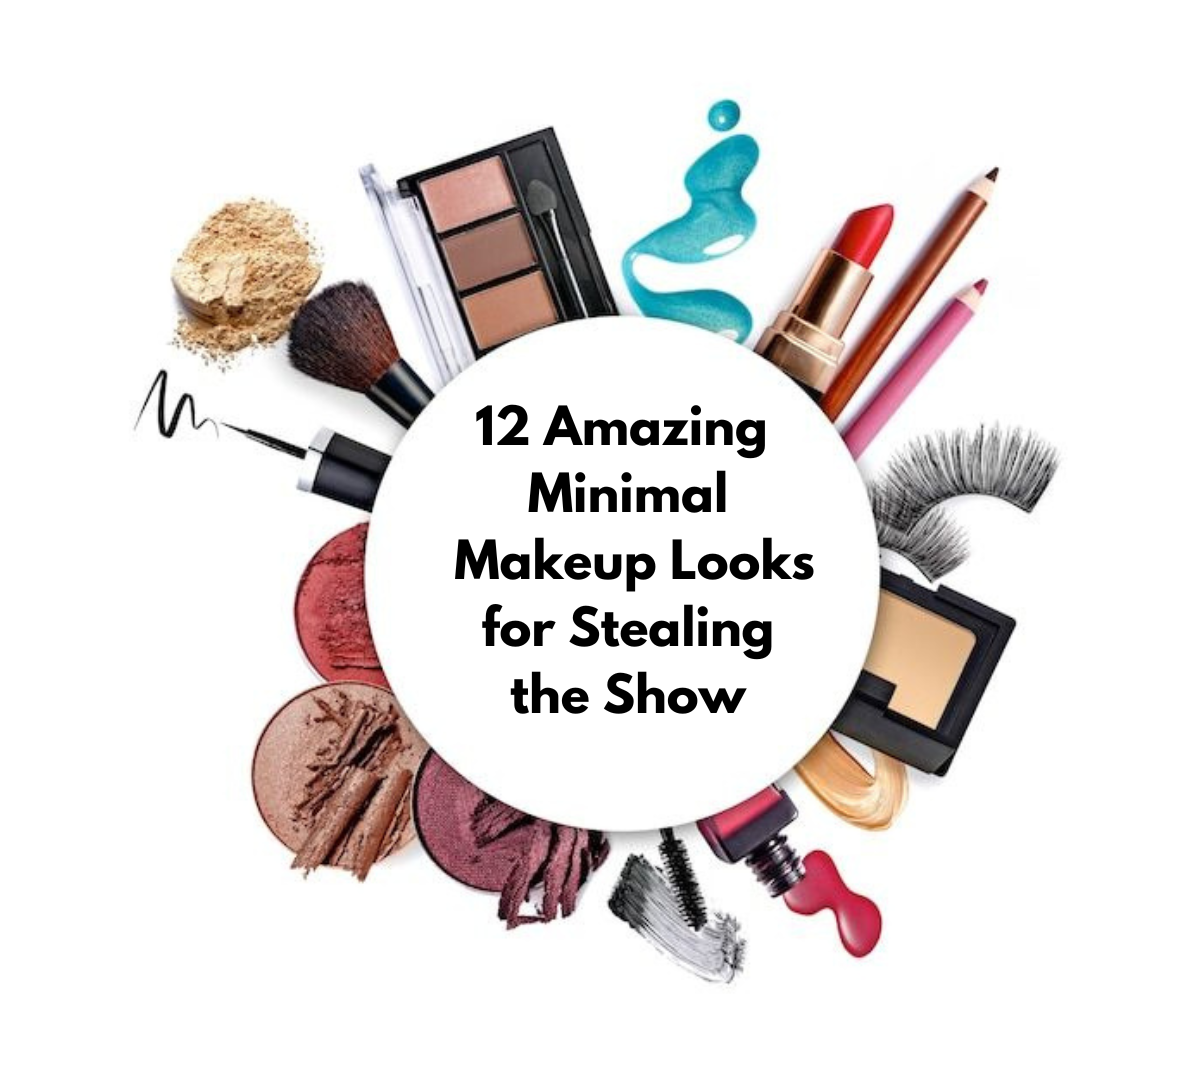 12 Amazing Minimal Makeup Looks for Stealing the Show